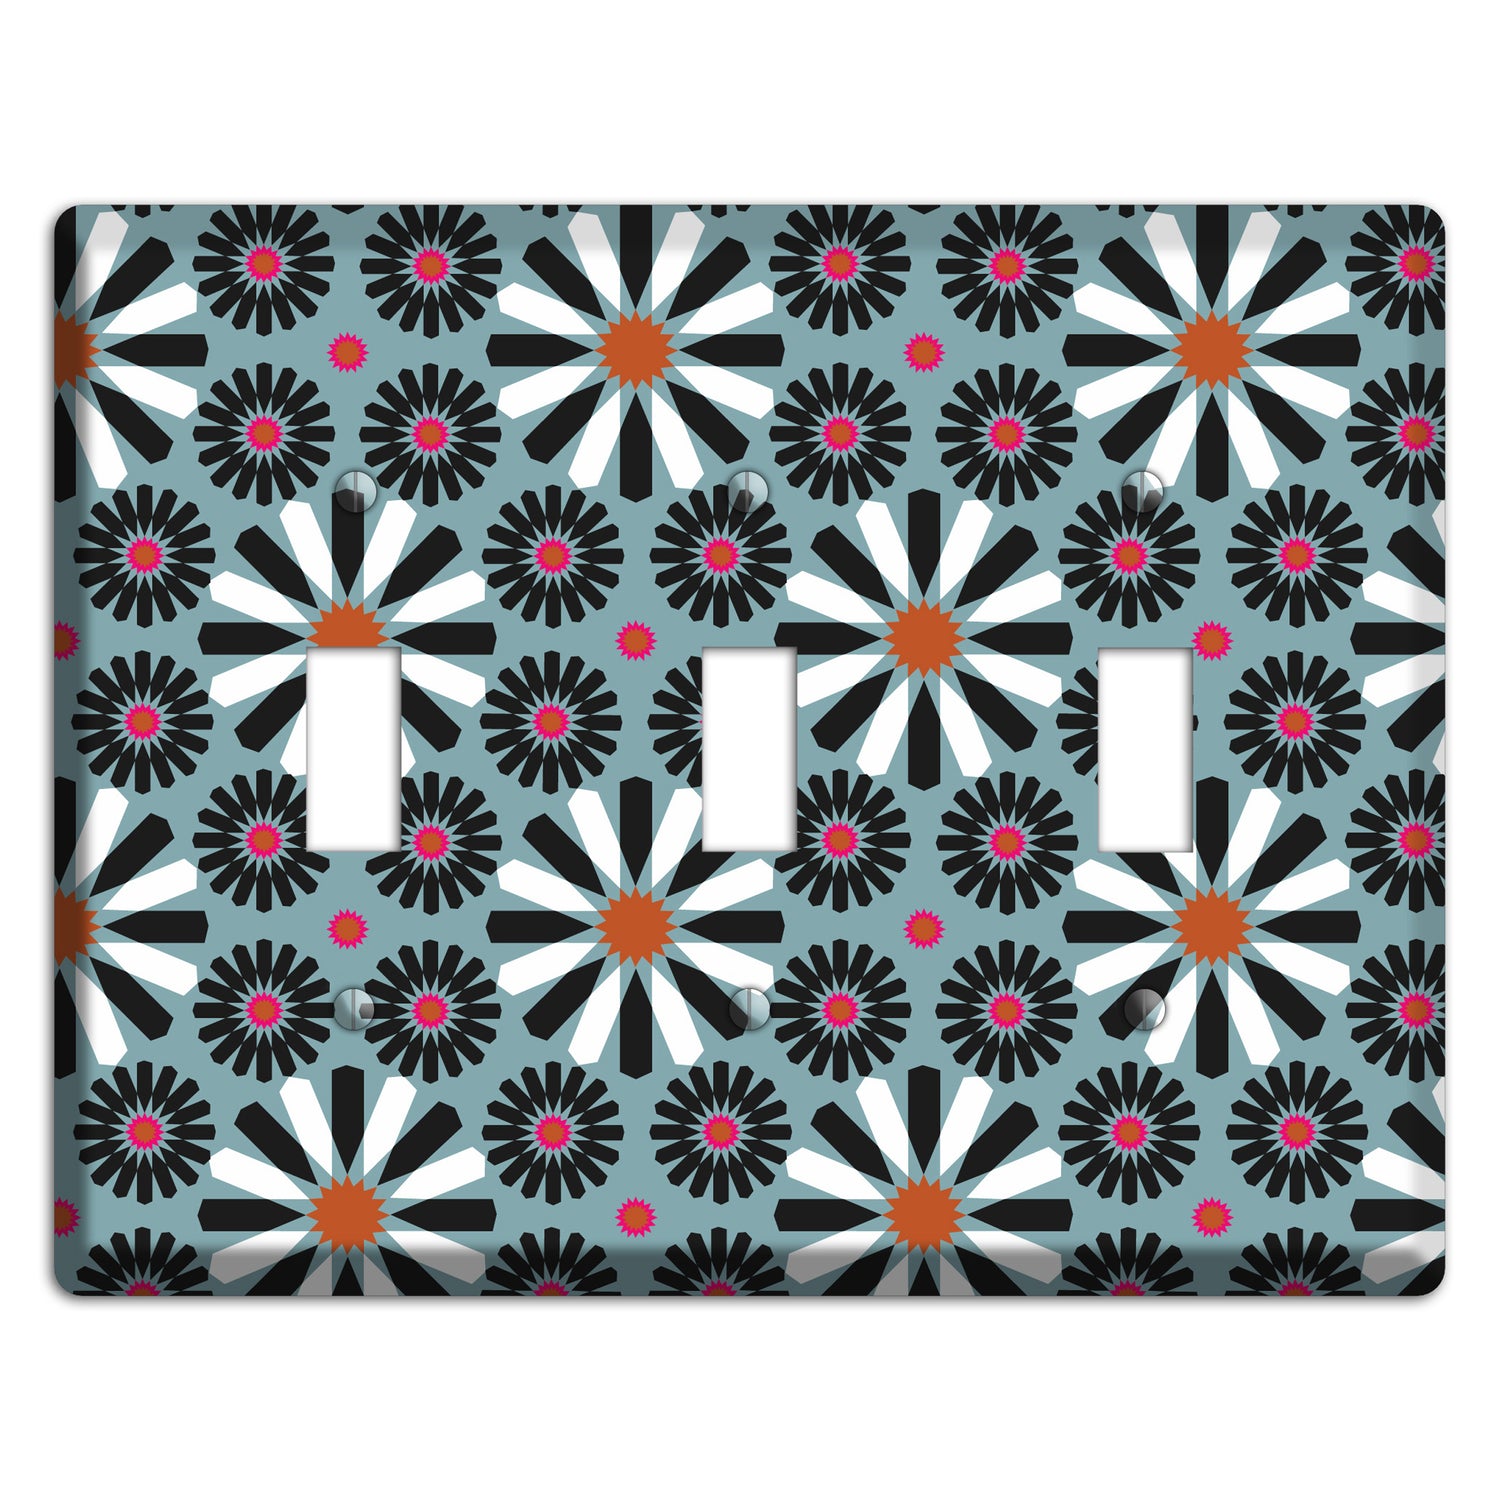 Dusty Blue with Scandinavian Floral 3 Toggle Wallplate